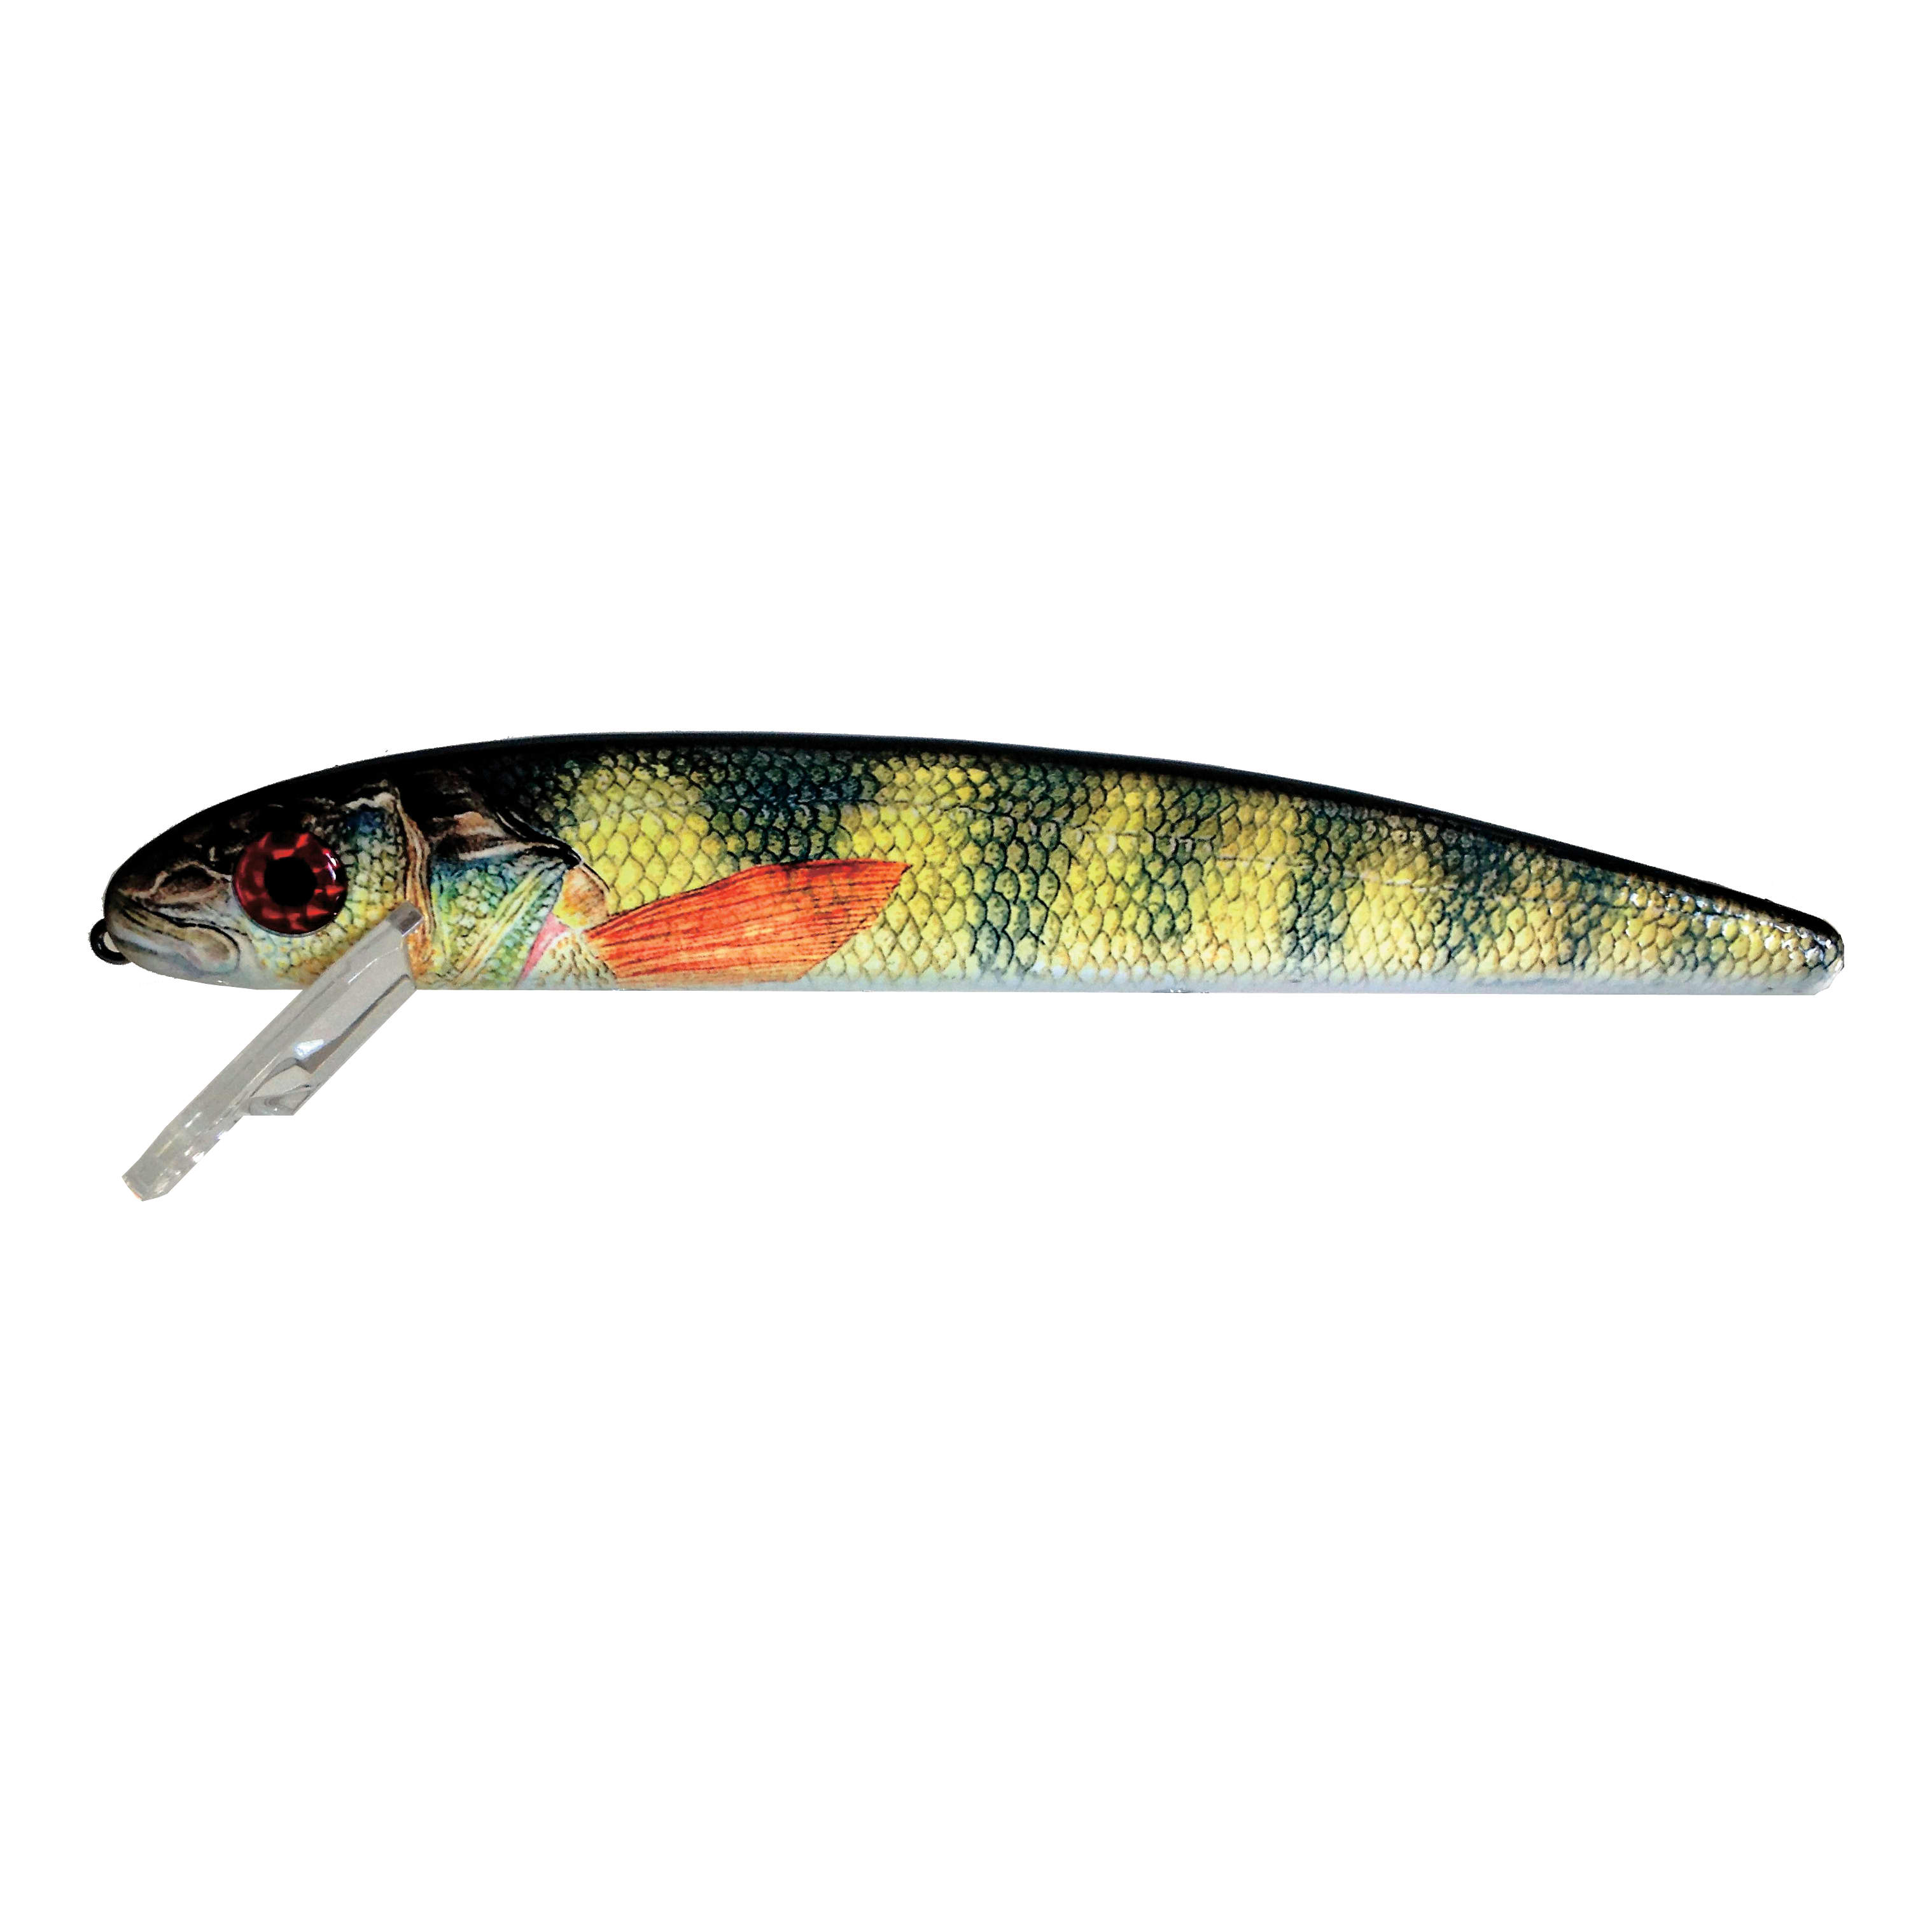 Jakes Lures Bait & Tackle in Sporting Goods Department - Smith's